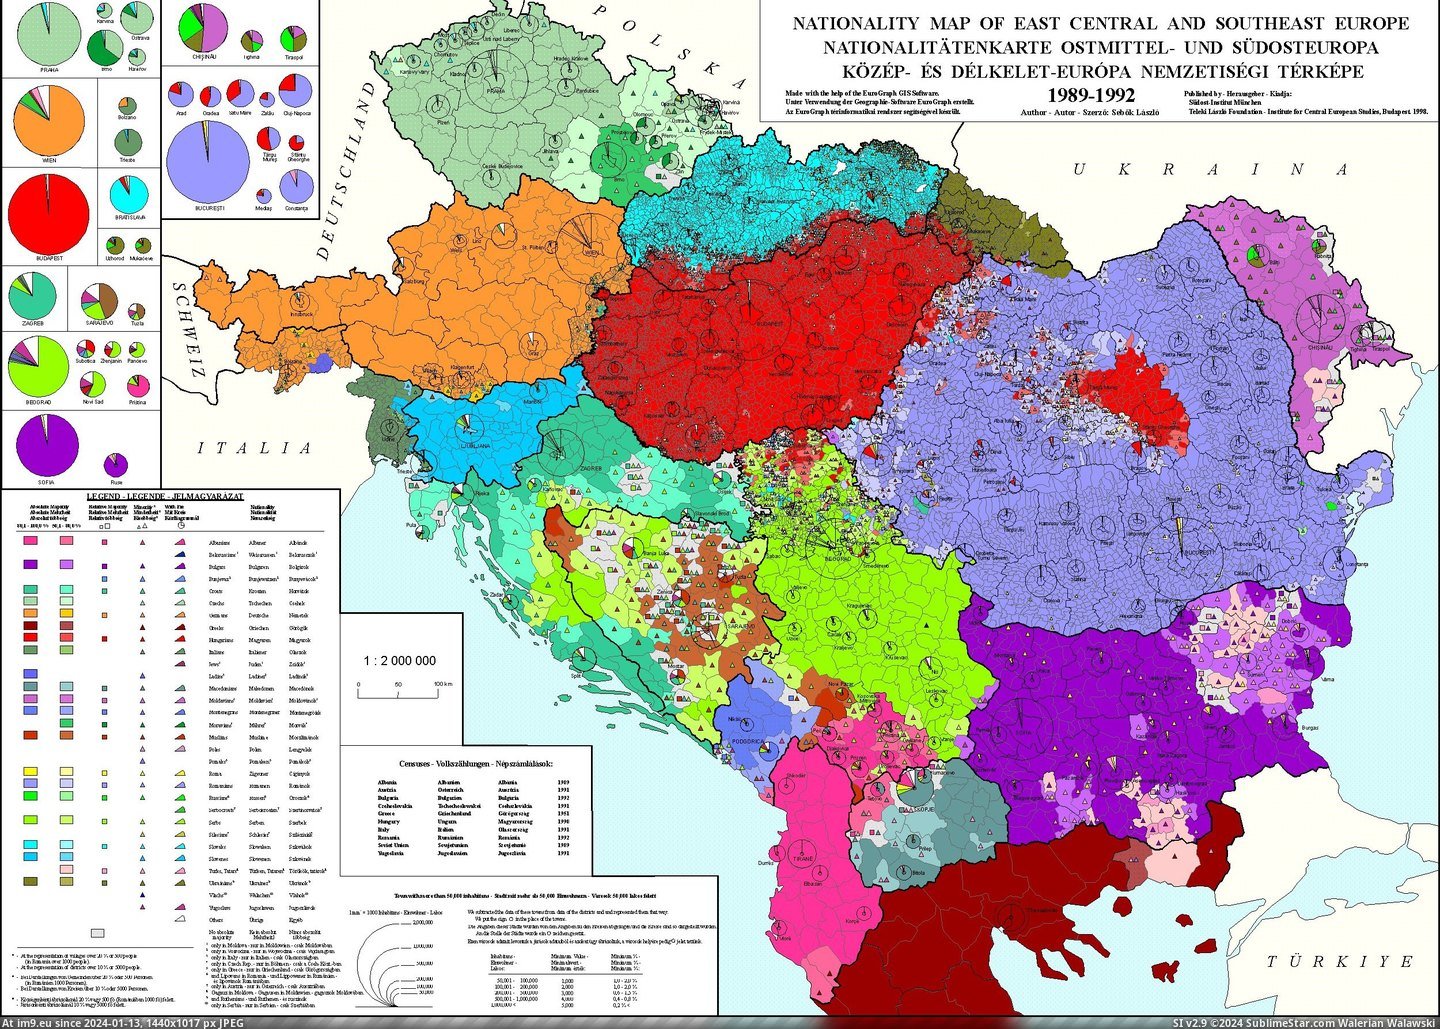 #Map #Europe #Nationality #Balkans #Southern #Central [Mapporn] Nationality Map of the Balkans and southern Central Europe [2500x1778] Pic. (Bild von album My r/MAPS favs))